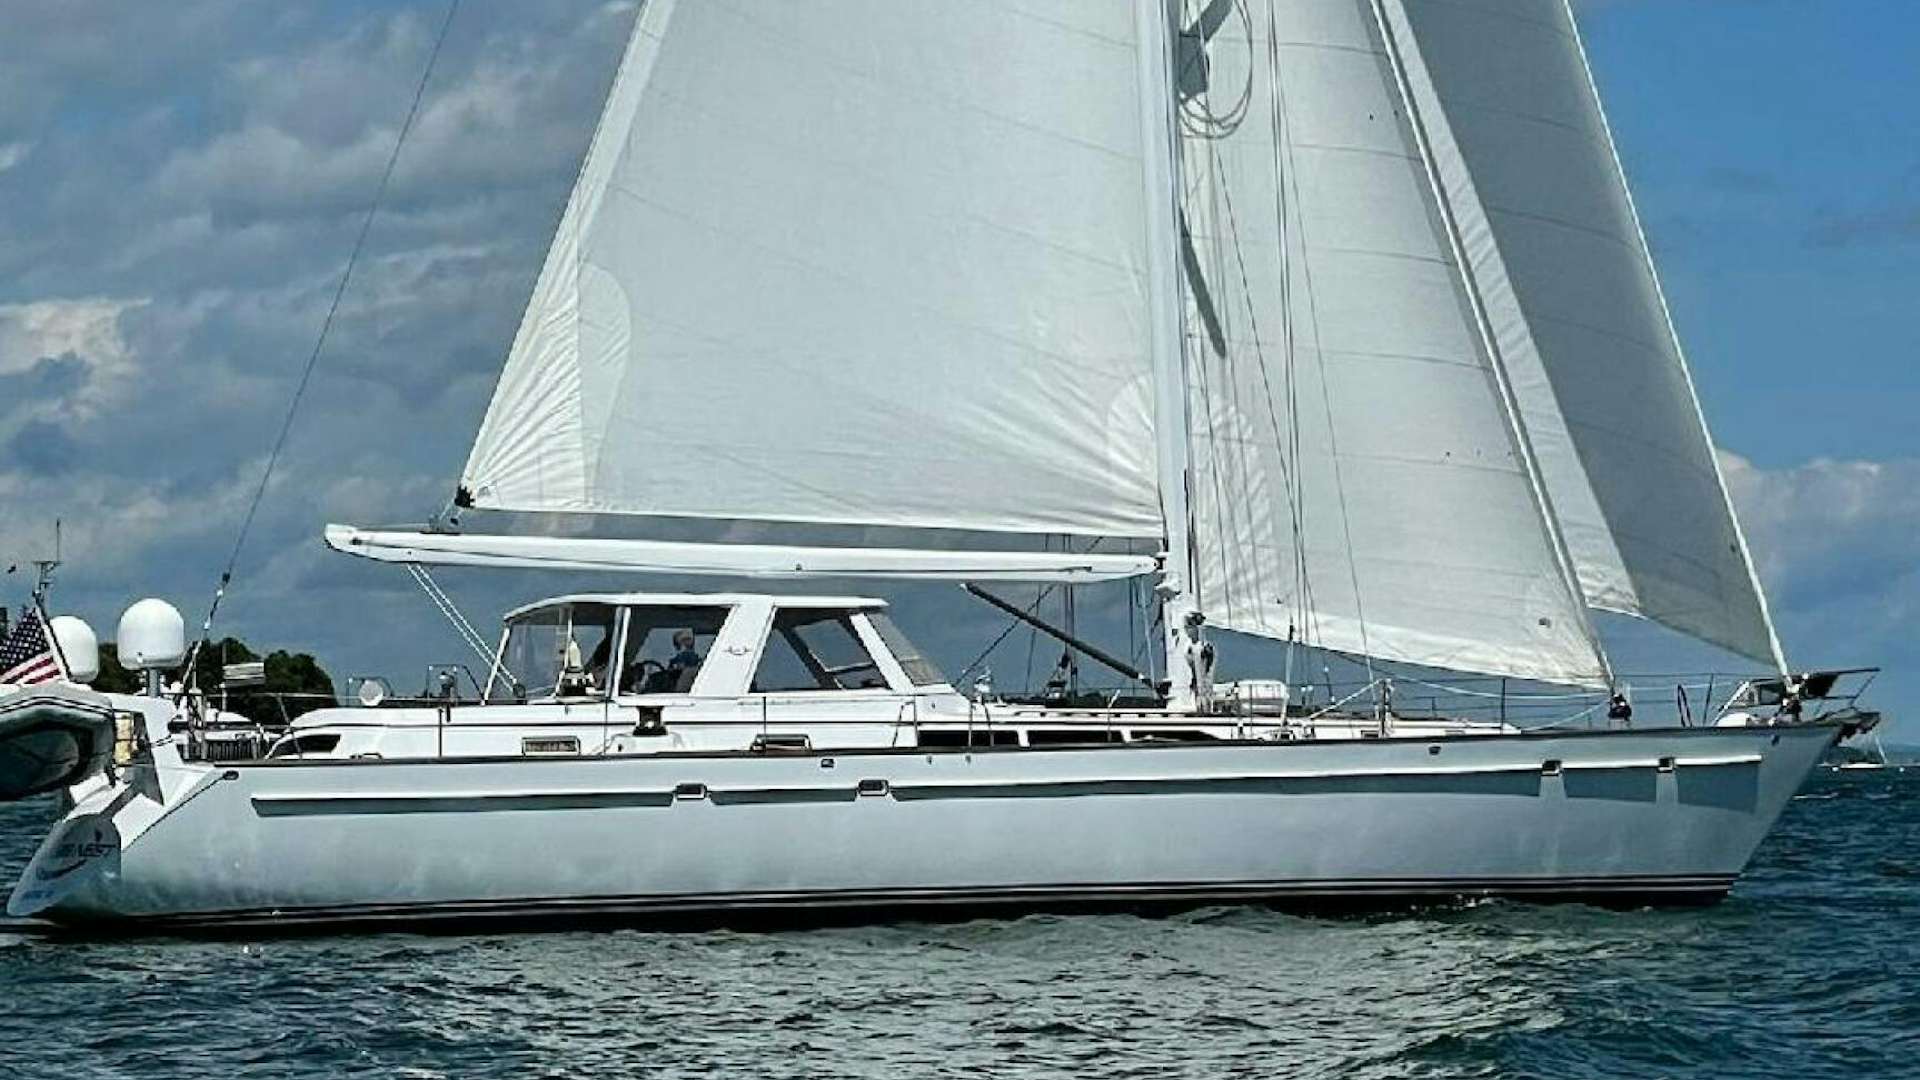 Watch Video for EAGLES NEST Yacht for Sale